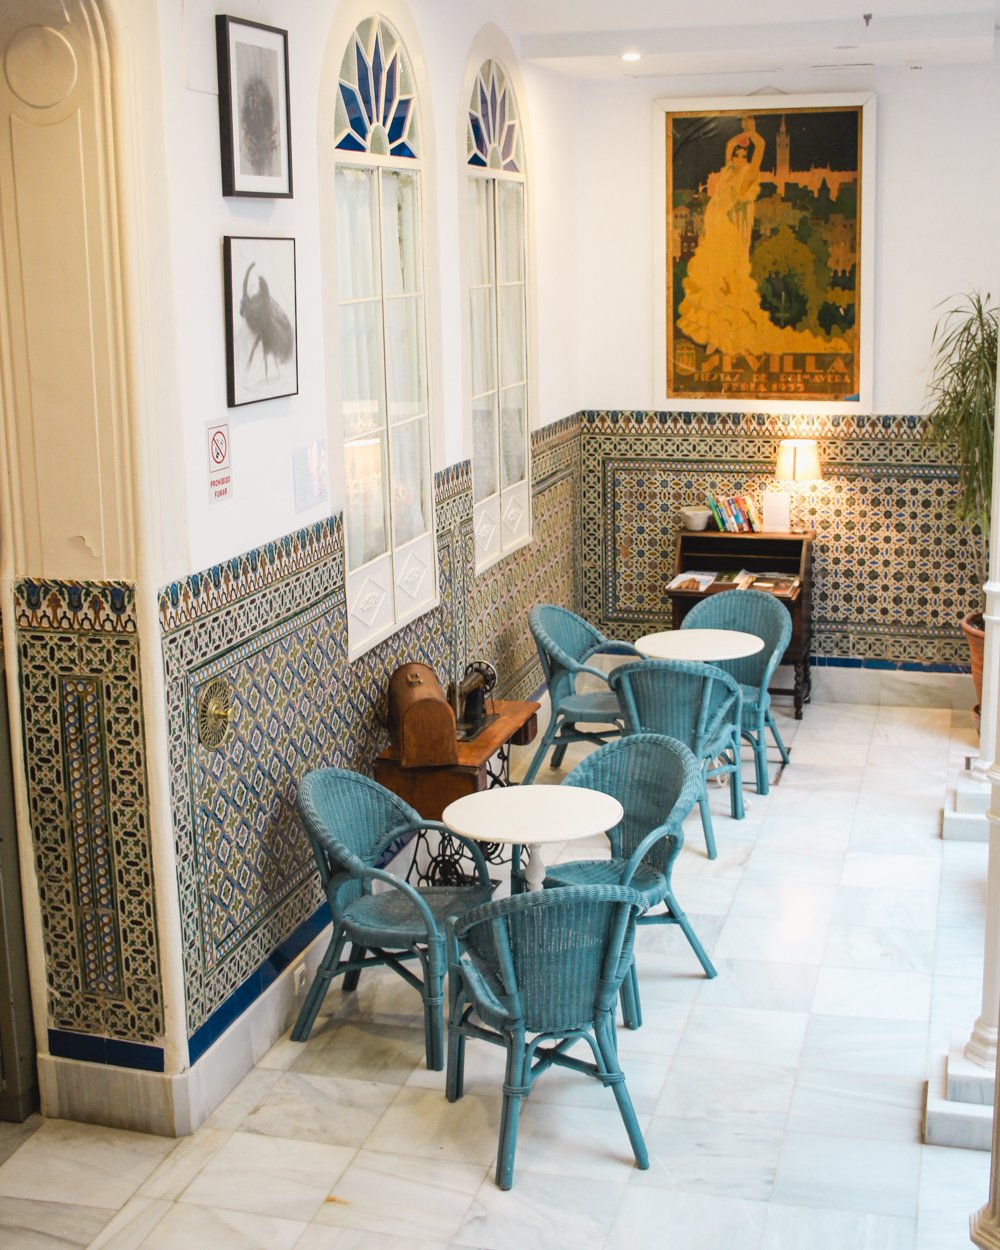 Where to stay in Seville, Spain. 